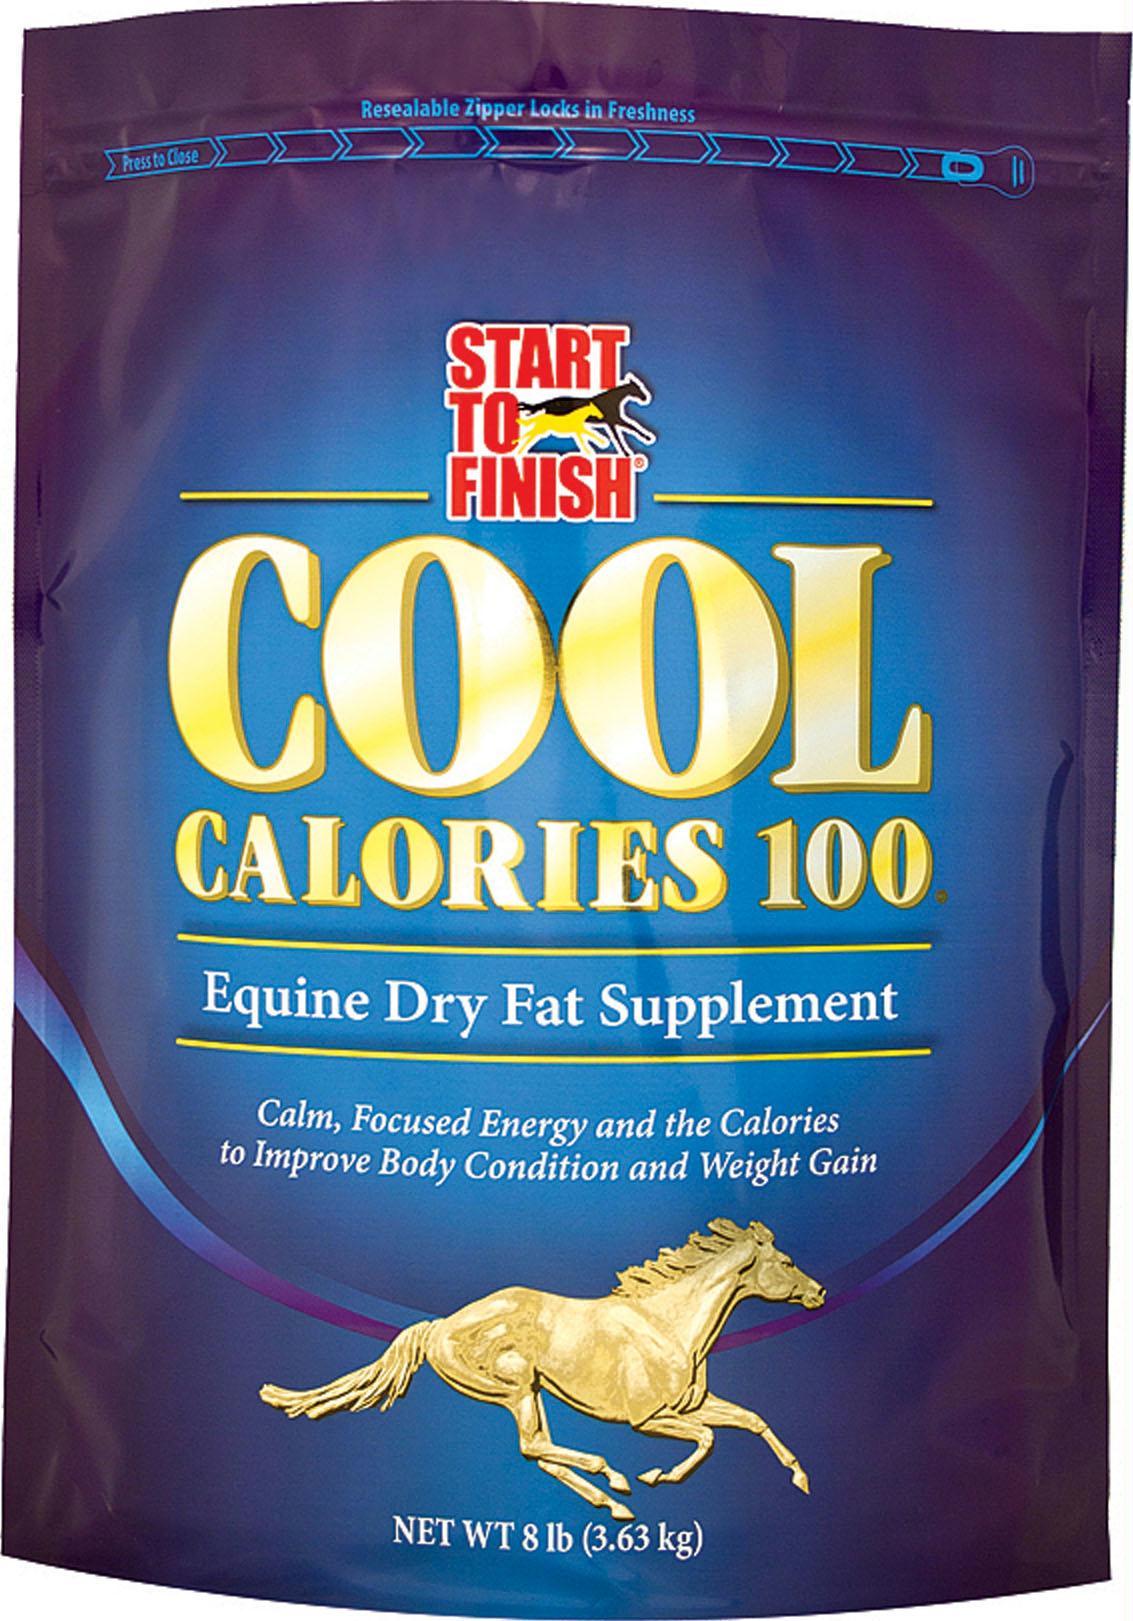 Start To Finish Cool Calories 100 Horse Supplement - aomega-products